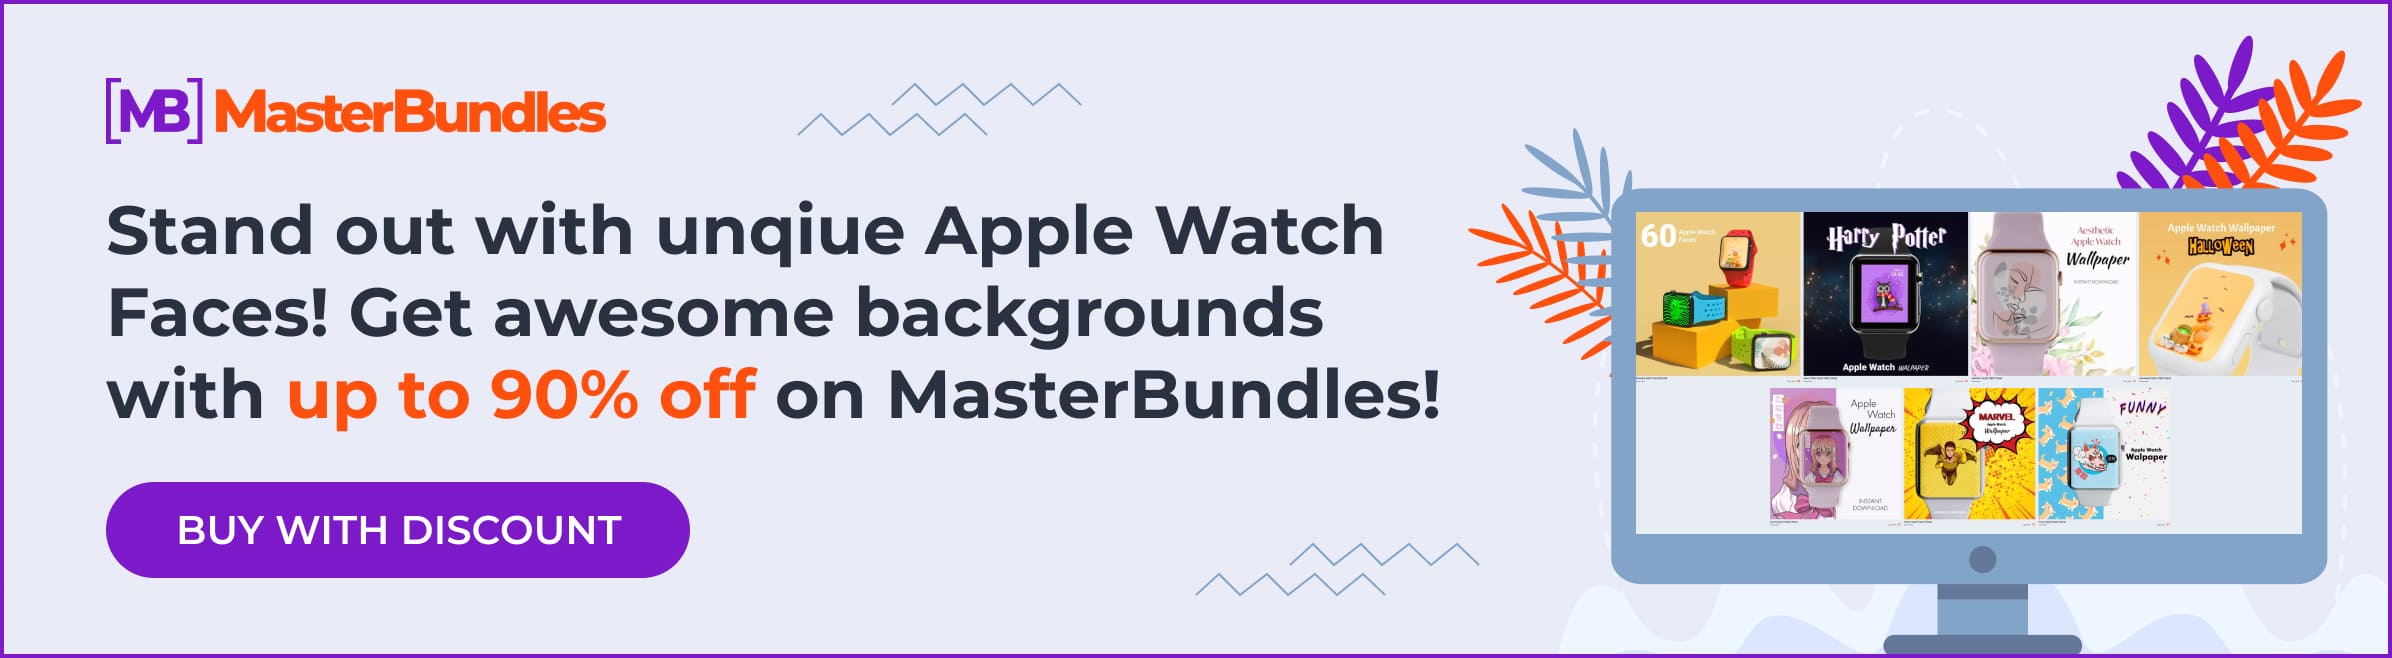 Banner for Apple Watch faces with discount.